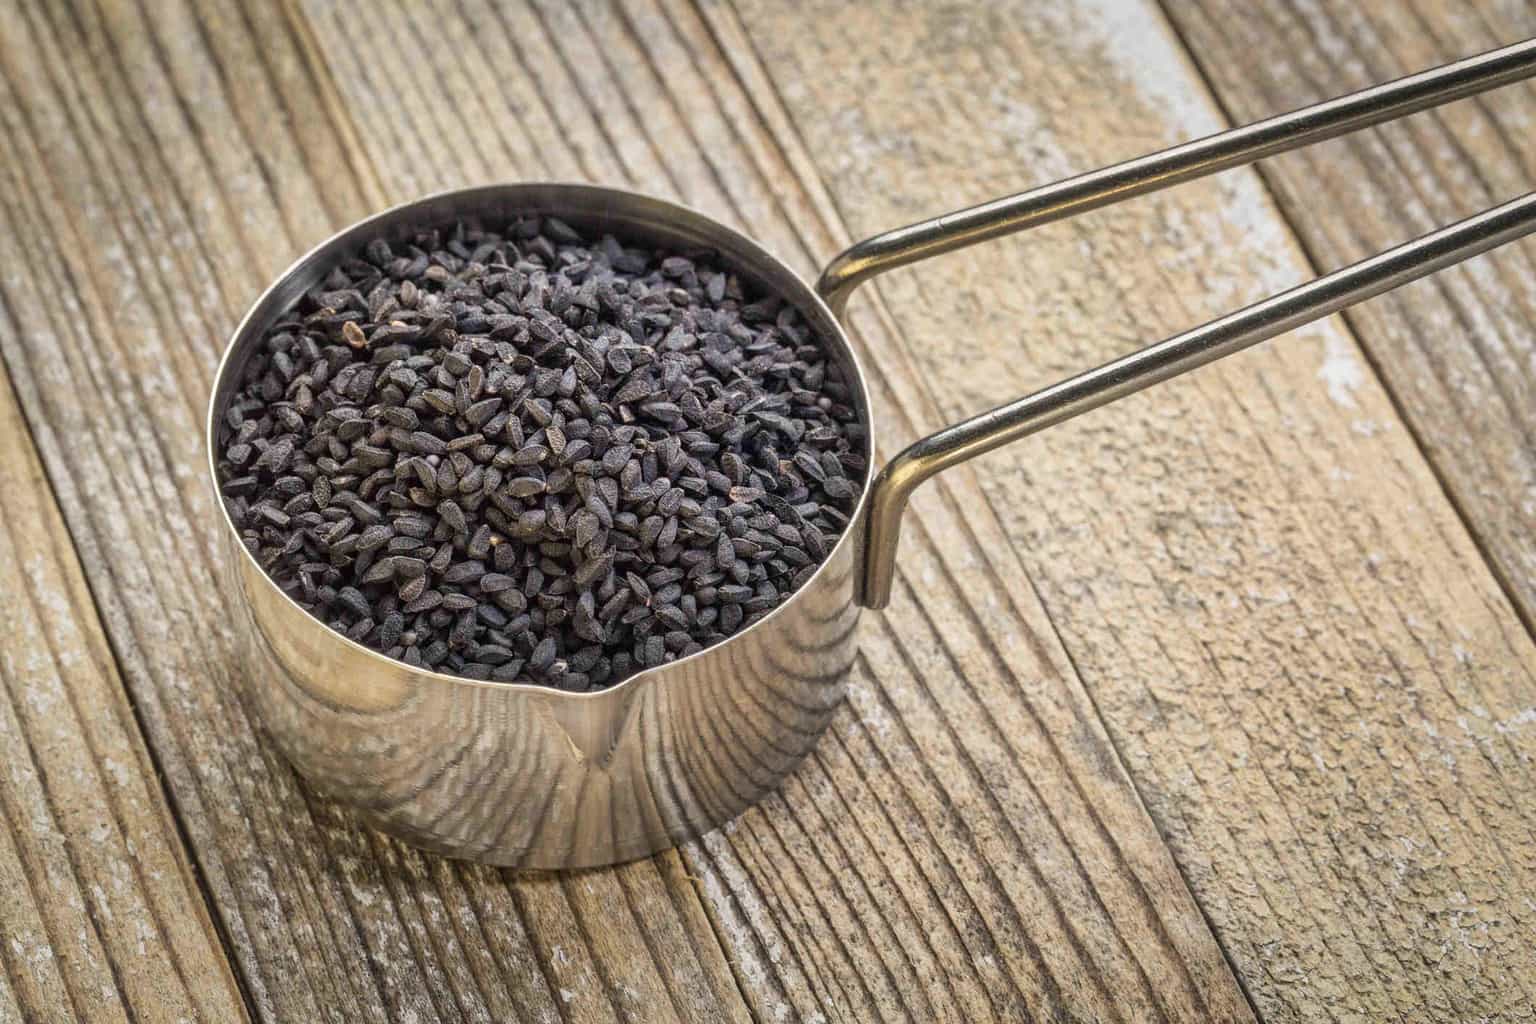 Black cumin seeds may help diabetes, obesity and thyroid problems